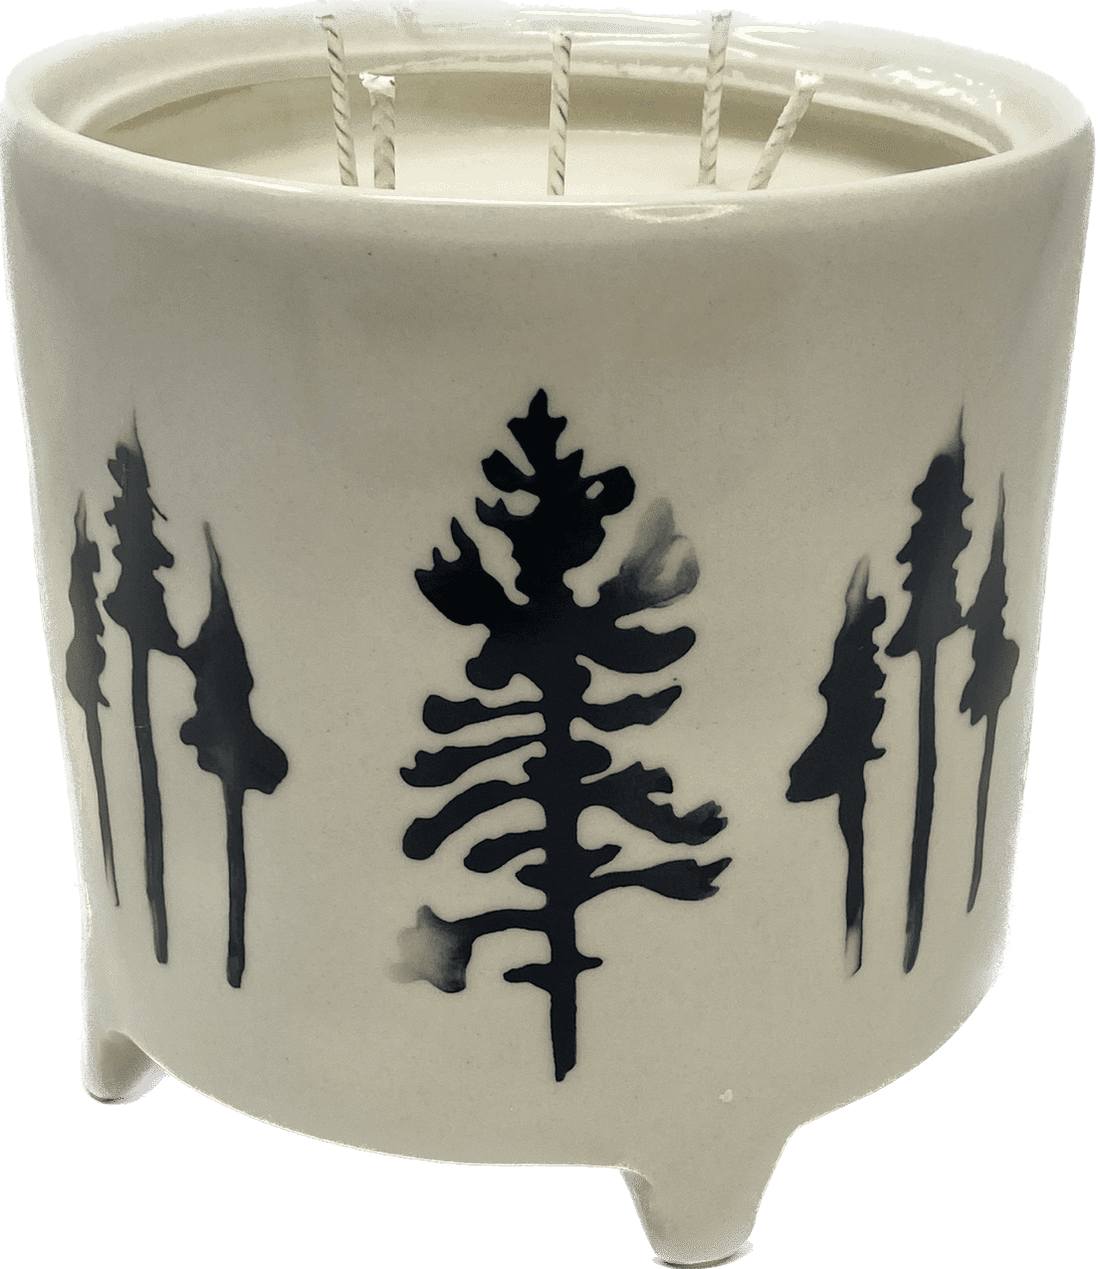 White with Black Pine Tree Design Candle - Lodge